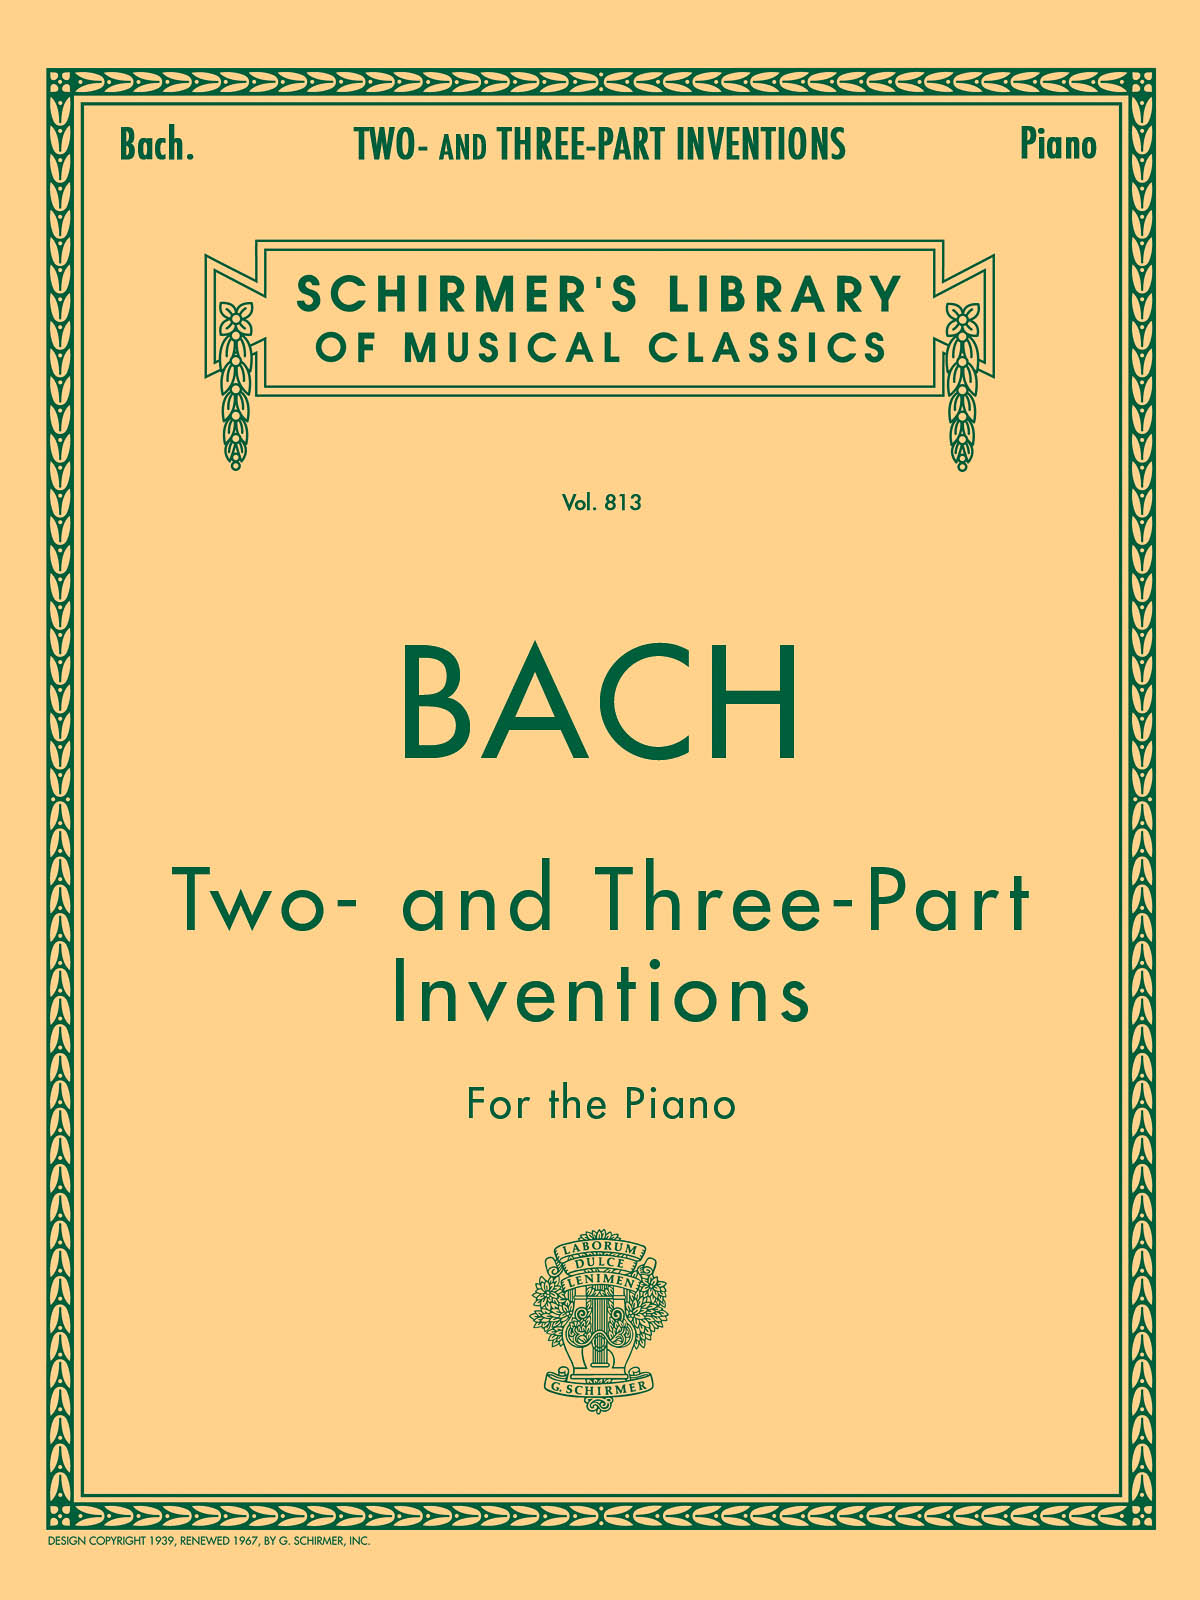 Johann Sebastian Bach: 15 Two- and Three-Part Inventions